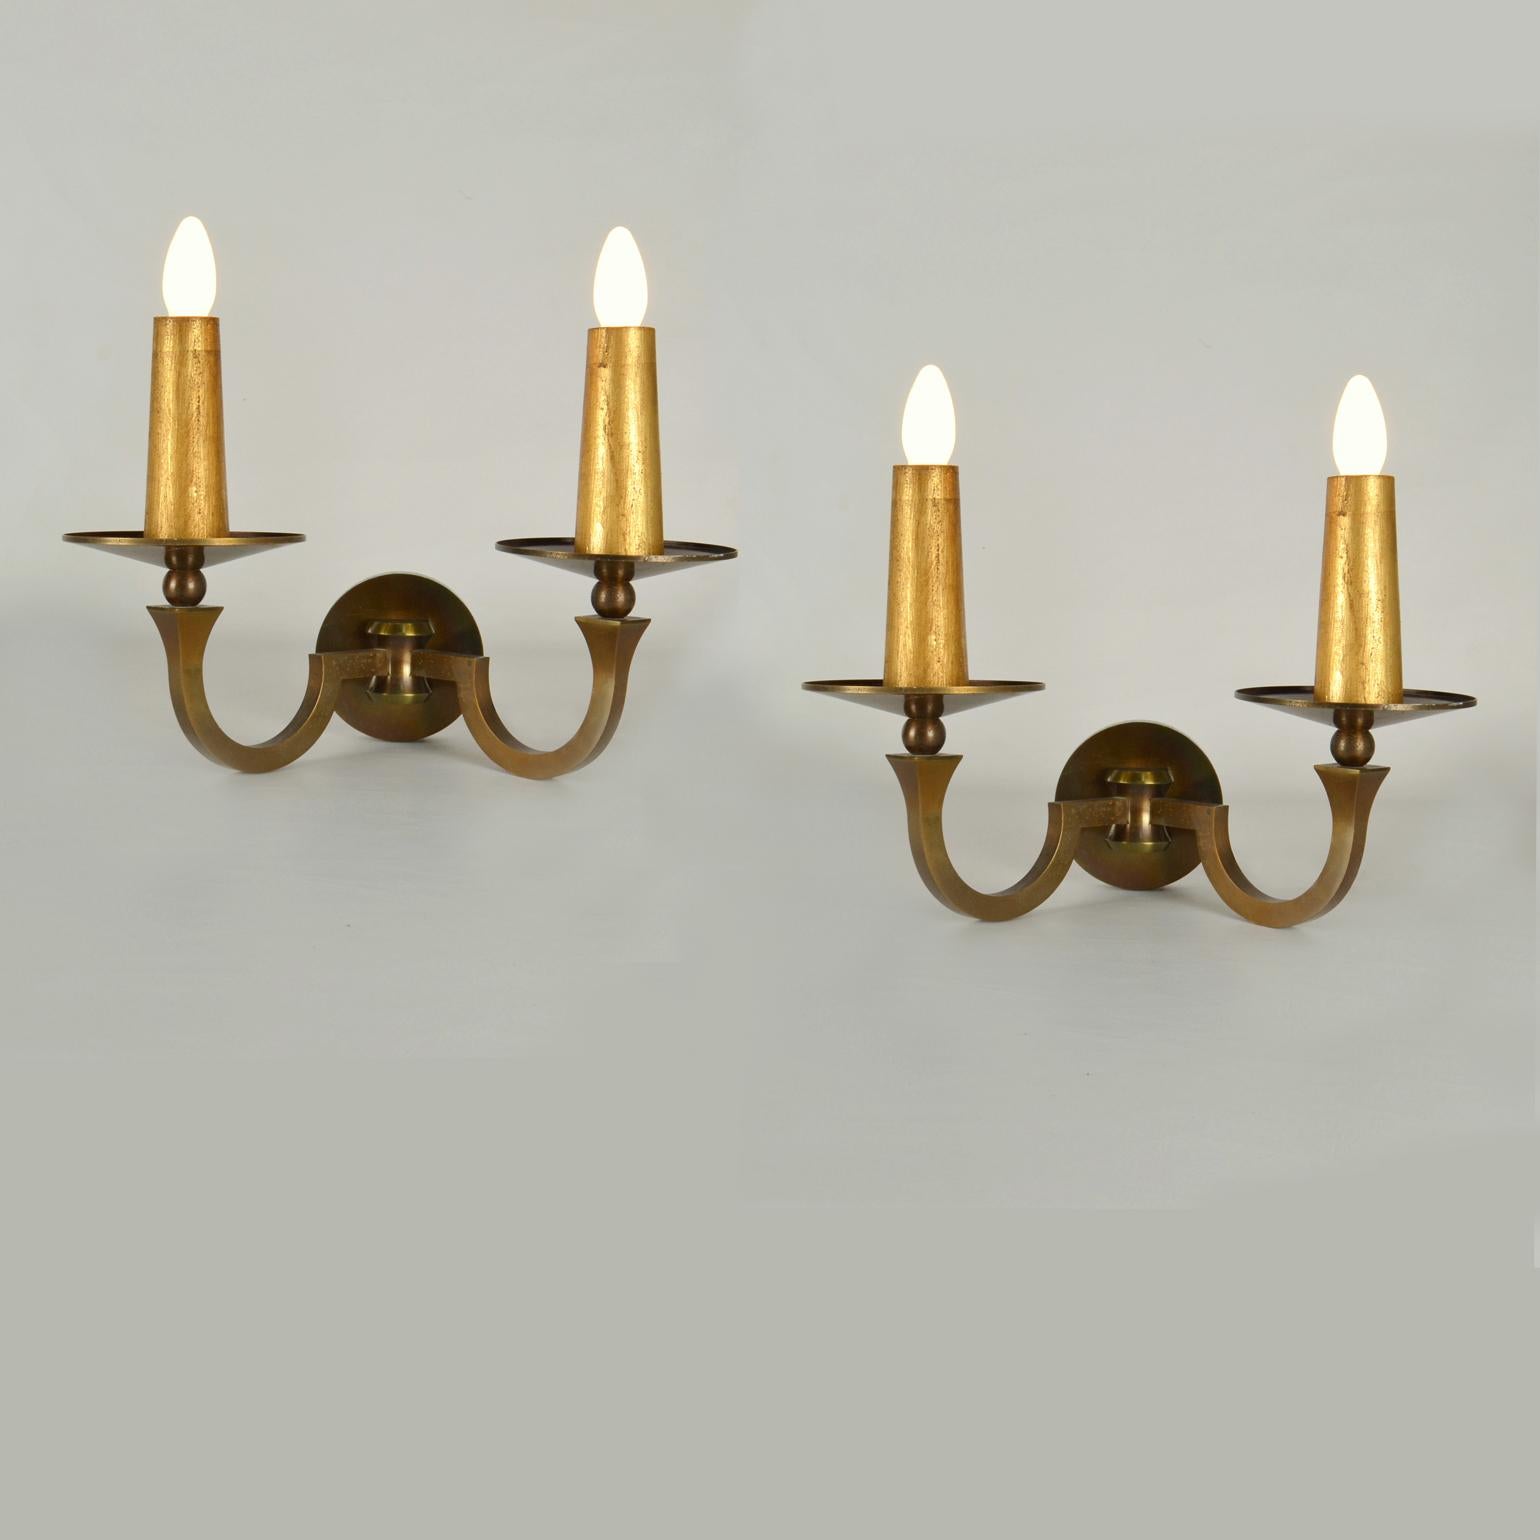 Pair of French Classical bronze and gild wood wall scones have scrolled-shaped arms in the style of the ancient Greek ionic columns. The arms are connected by a bronze sphere which is attached to a cupped back plate. Their symmetry evenly spaced